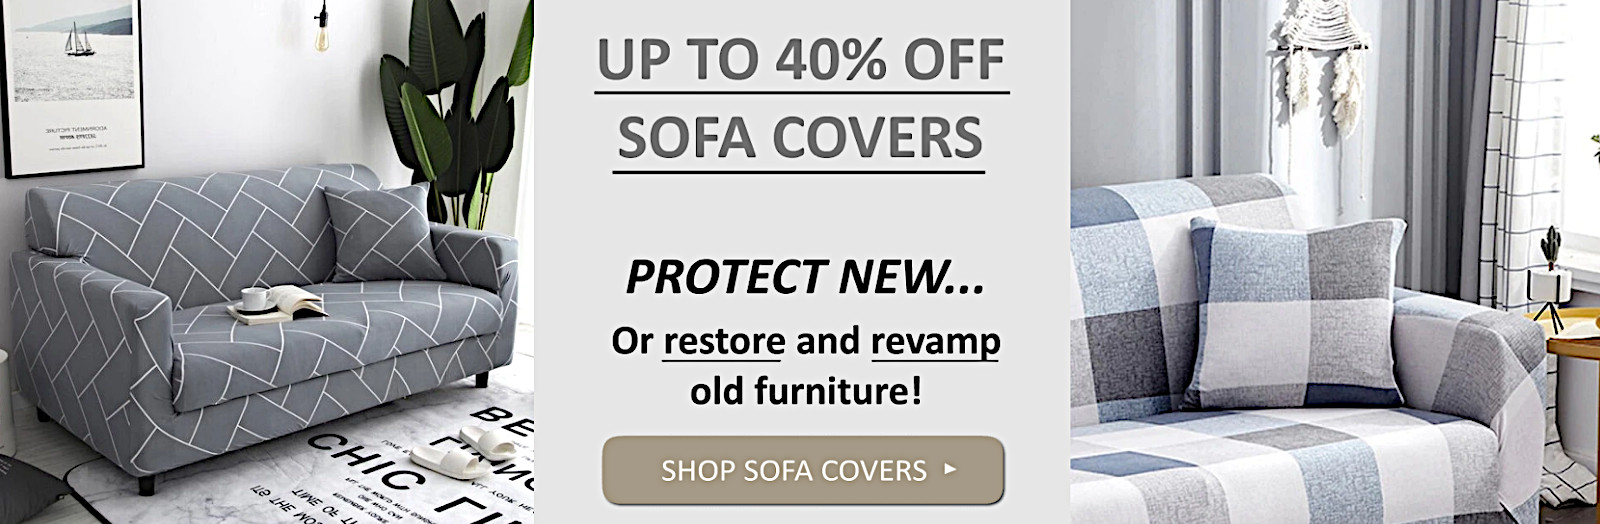 Discounted sofa covers